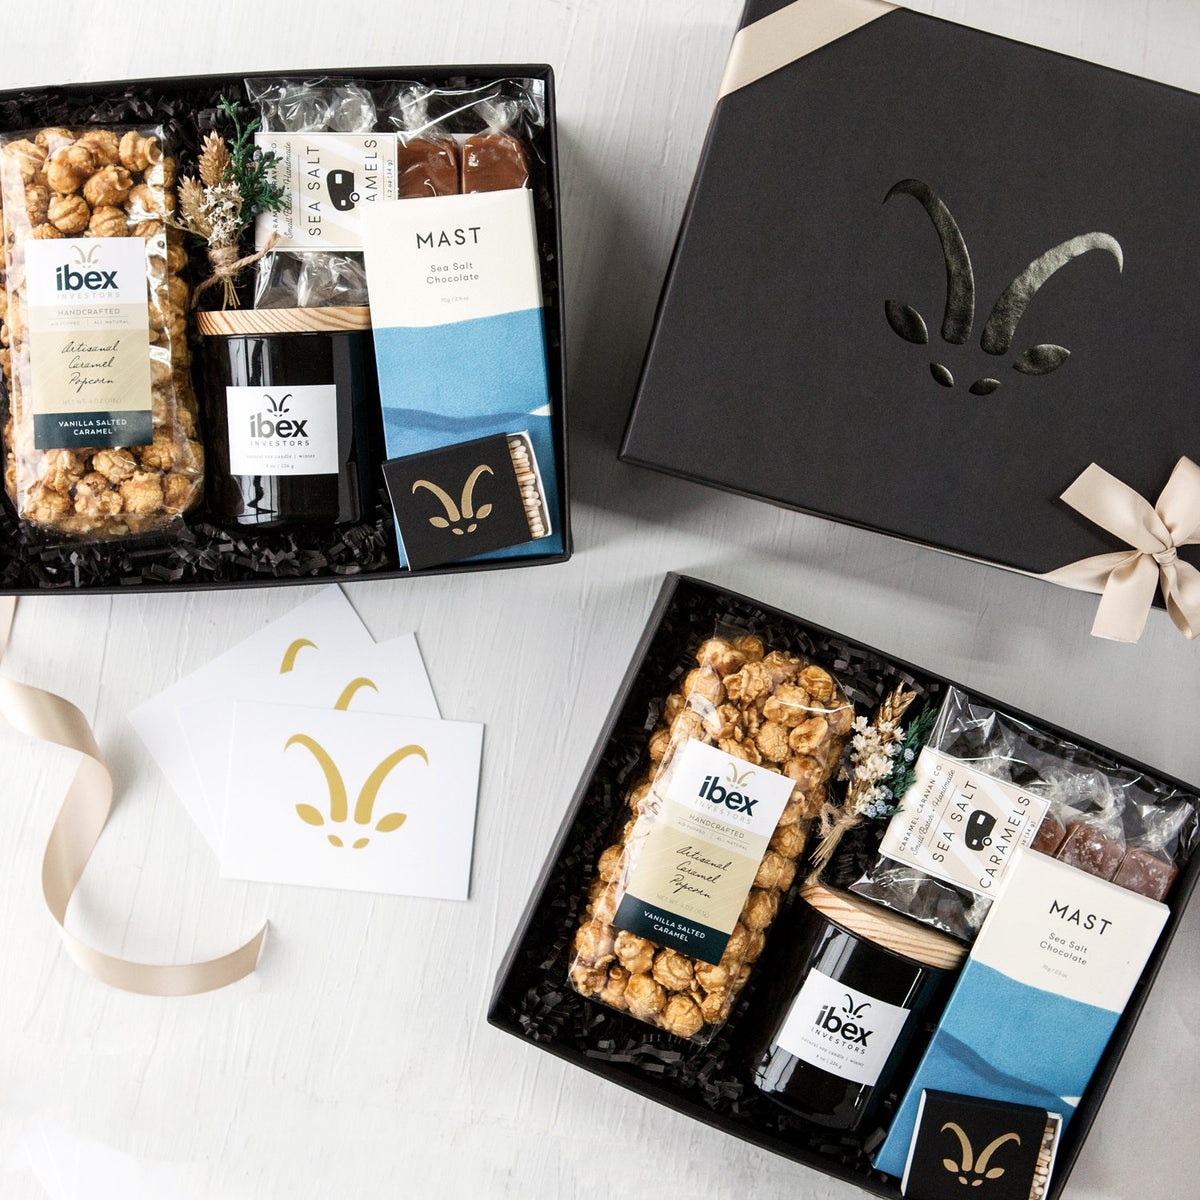 Work From Home Gift Box  Curated Gifts & Custom Gift Boxes - Foxblossom Co.